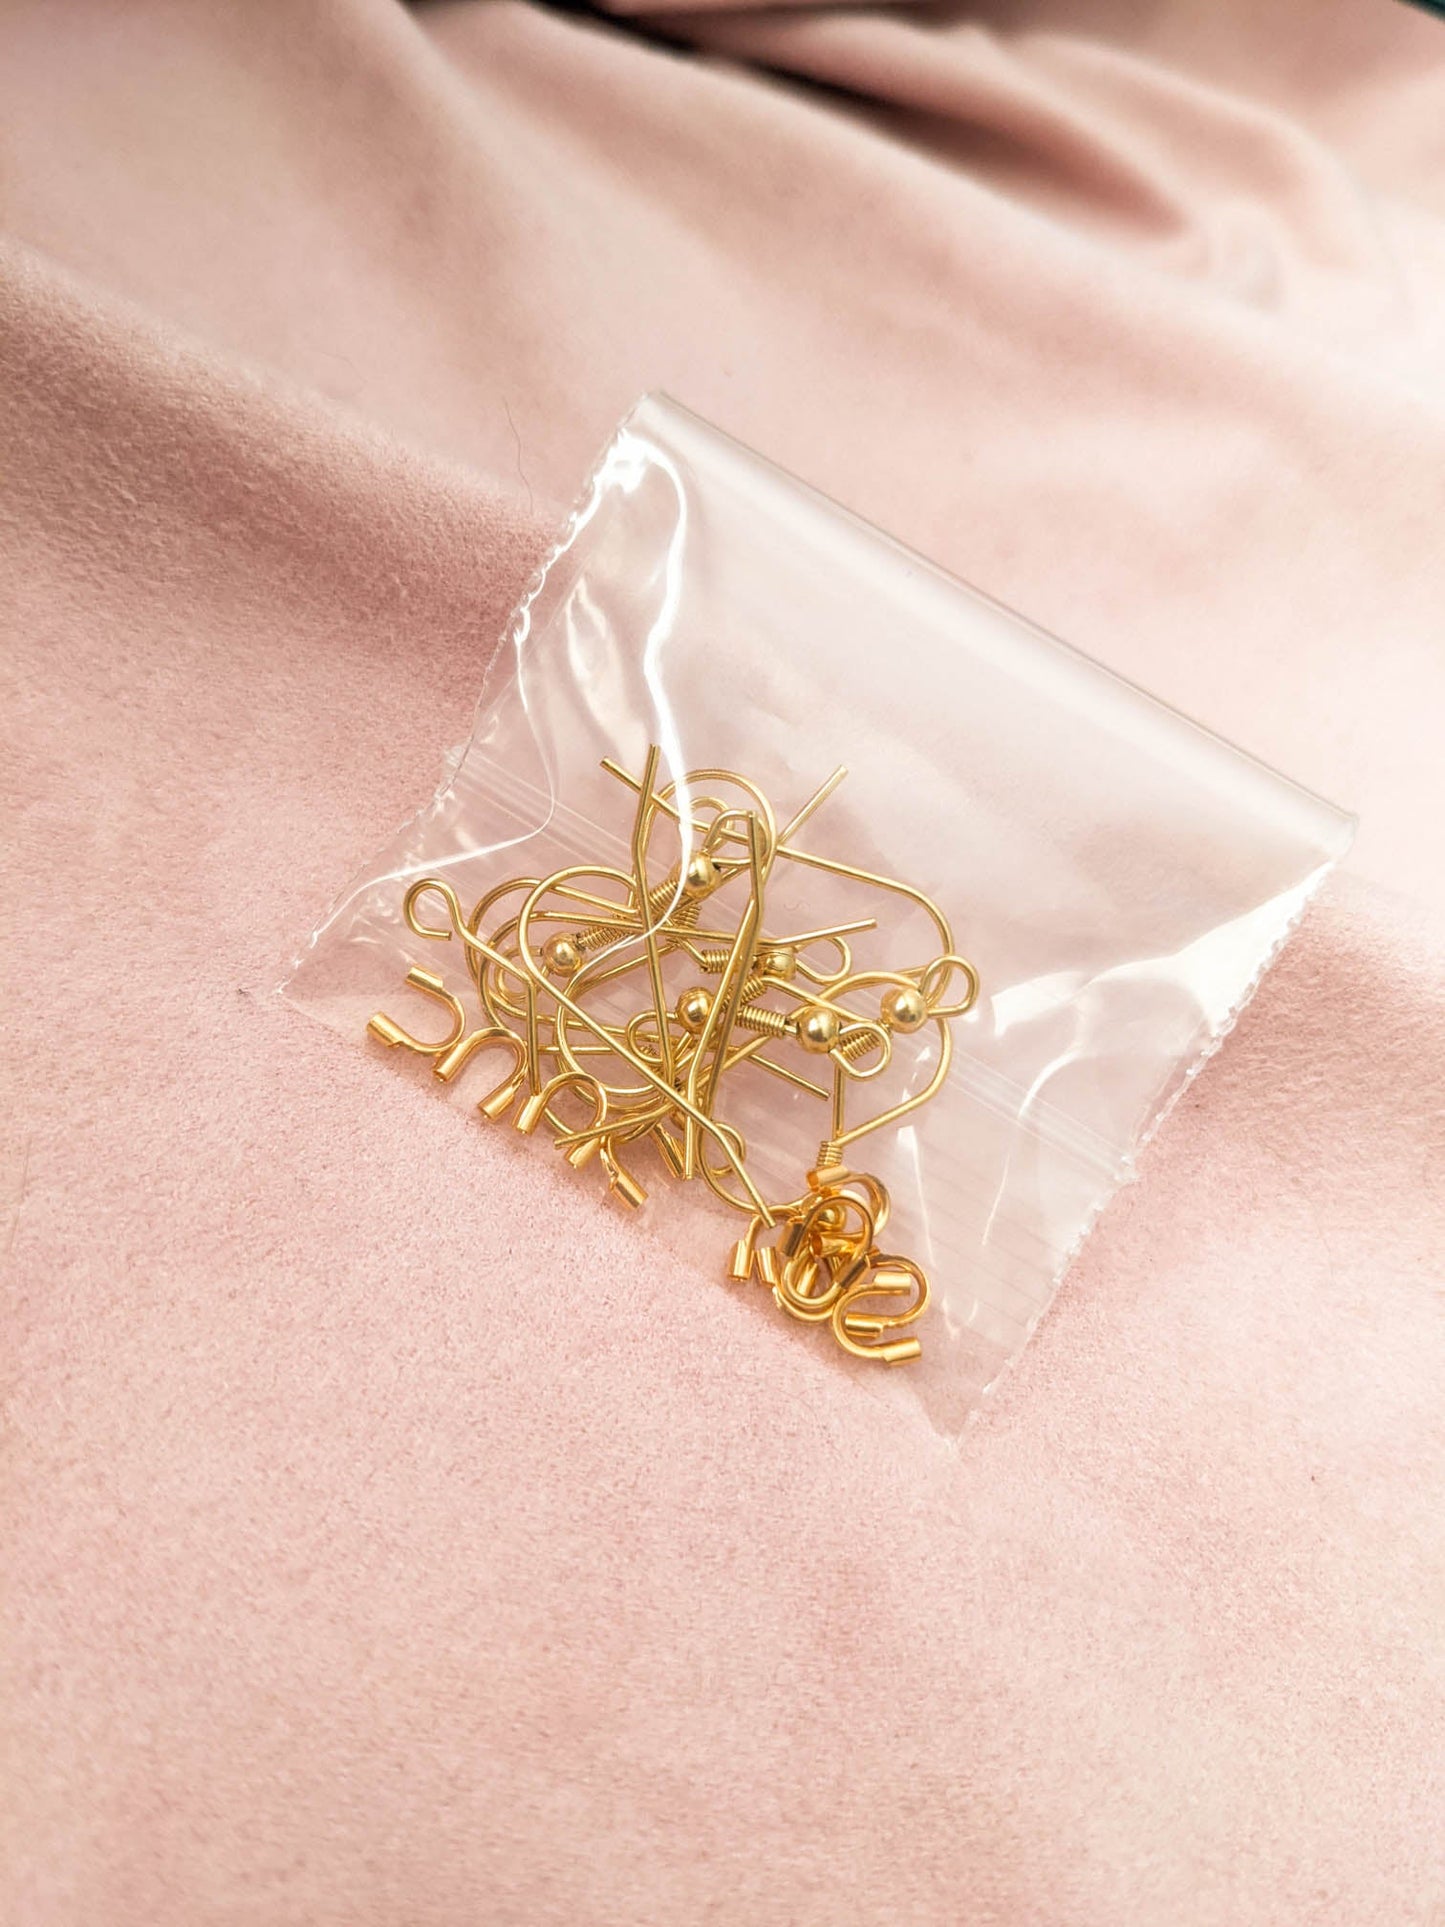 Gold - Set of 5 Ear Wires & Wire Guards